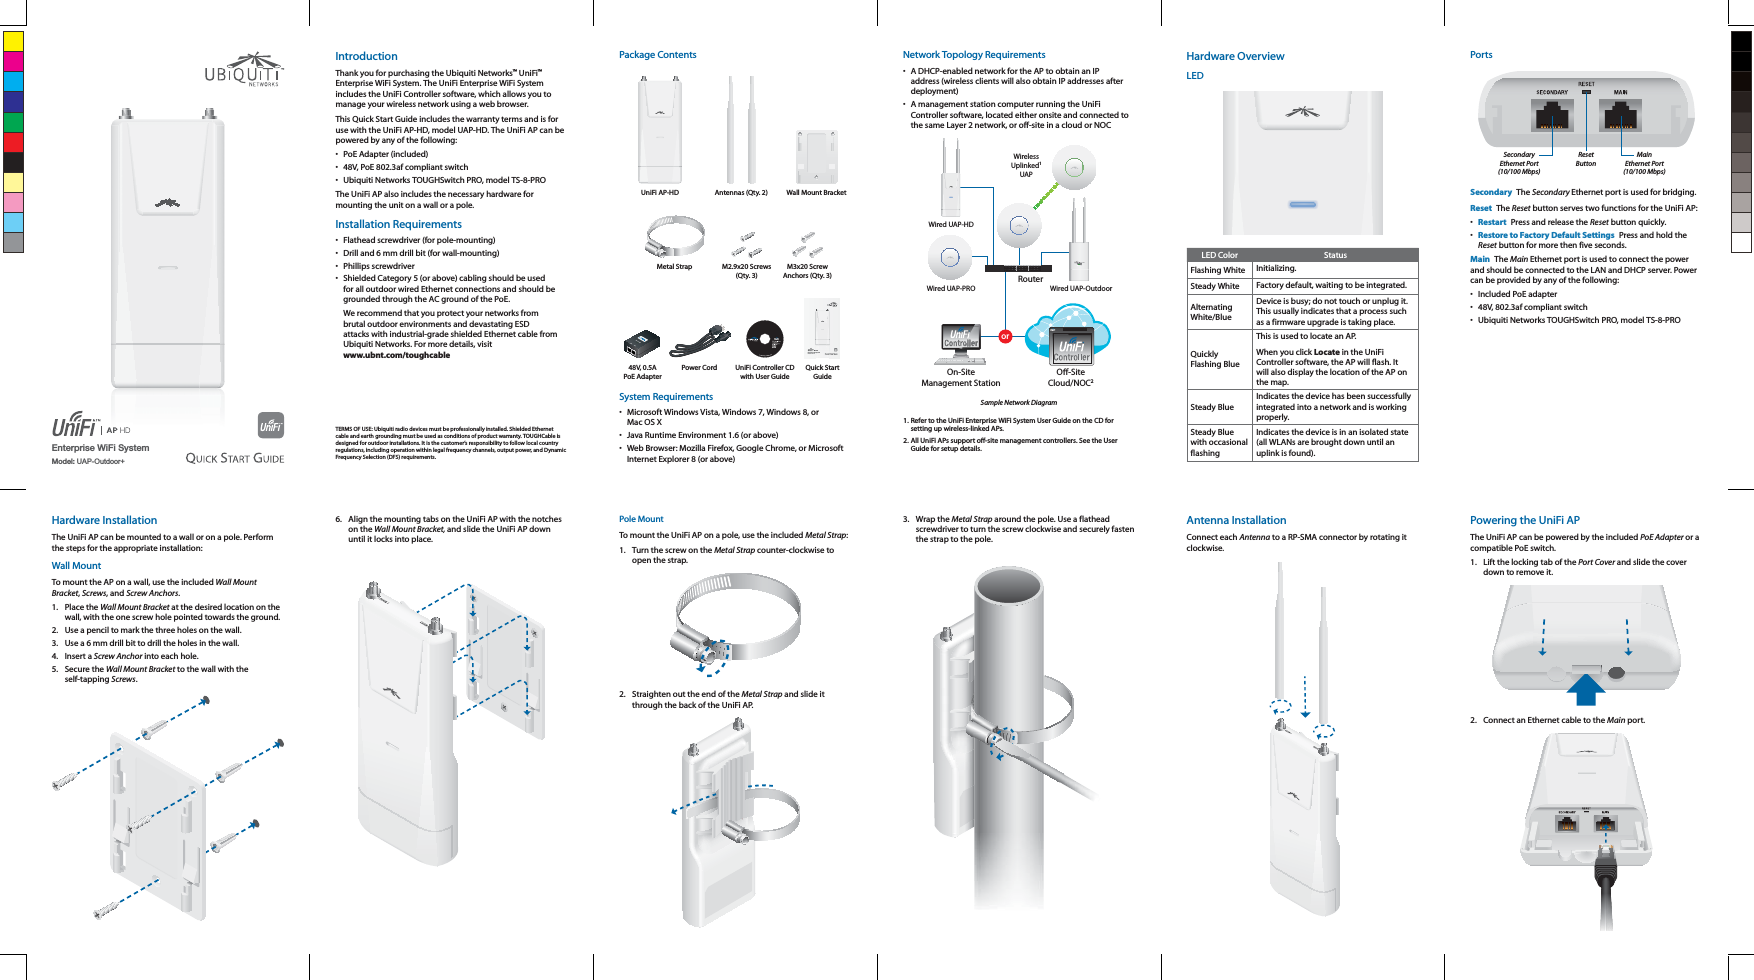 Enterprise WiFi SystemModel: UAP-Outdoor+IntroductionThank you for purchasing the Ubiquiti Networks™ UniFi™ Enterprise WiFi System. The UniFi Enterprise WiFi System includes the UniFi Controller software, which allows you to manage your wireless network using a web browser.This Quick Start Guide includes the warranty terms and is for use with the UniFi AP-HD, model UAP-HD. The UniFi AP can be powered by any of the following:•  PoE Adapter (included)•  48V, PoE 802.3af compliant switch•  Ubiquiti Networks TOUGHSwitch PRO, model TS-8-PROThe UniFi AP also includes the necessary hardware for mounting the unit on a wall or a pole.Installation Requirements•  Flathead screwdriver (for pole-mounting)•  Drill and 6 mm drill bit (for wall-mounting)• Phillips screwdriver•  Shielded Category 5 (or above) cabling should be used for all outdoor wired Ethernet connections and should be grounded through the AC ground of the PoE.We recommend that you protect your networks from brutal outdoor environments and devastating ESD attacks with industrial-grade shielded Ethernet cable from  www.ubnt.com/toughcableTERMS OF USE: Ubiquiti radio devices must be professionally installed. Shielded Ethernet cable and earth grounding must be used as conditions of product warranty. TOUGHCable is designed for outdoor installations. It is the customer’s responsibility to follow local country regulations, including operation within legal frequency channels, output power, and Dynamic Frequency Selection (DFS) requirements.Package ContentsUniFi AP-HD Antennas (Qty. 2) Wall Mount BracketMetal Strap M2.9x20 Screws  (Qty. 3)M3x20 Screw Anchors (Qty. 3)Enterprise WiFi SystemModels: UAP-HD48V, 0.5A PoE AdapterPower Cord UniFi Controller CD with User GuideQuick Start GuideSystem Requirements•  Microsoft Windows Vista, Windows 7, Windows 8, or •  Java Runtime Environment 1.6 (or above)•  Web Browser: Mozilla Firefox, Google Chrome, or Microsoft Internet Explorer 8 (or above)Network Topology Requirements•  A DHCP-enabled network for the AP to obtain an IP address (wireless clients will also obtain IP addresses after deployment)•  A management station computer running the UniFi Controller software, located either onsite and connected to orRouterO-SiteCloud/NOC2On-SiteManagement StationWired UAP-PROWired UAP-HDWirelessUplinked1UAPWired UAP-OutdoorSample Network Diagram1. Refer to the UniFi Enterprise WiFi System User Guide on the CD for setting up wireless-linked APs.All UniFi APs support off-site management controllers. See the User Guide for setup details.Hardware OverviewLEDLED Color StatusFlashing White Initializing.Steady White Factory default, waiting to be integrated.Alternating White/BlueDevice is busy; do not touch or unplug it. This usually indicates that a process such as a firmware upgrade is taking place.Quickly Flashing BlueThis is used to locate an AP. When you click Locate in the UniFi Controller software, the AP will flash. It will also display the location of the AP on the map.Steady BlueIndicates the device has been successfully integrated into a network and is working properly.Steady Blue with occasional flashingIndicates the device is in an isolated state (all WLANs are brought down until an uplink is found).PortsMainEthernet Port(10/100 Mbps)ResetButtonSecondaryEthernet Port(10/100 Mbps)Secondary  The Secondary Ethernet port is used for bridging.Reset  The Reset button serves two functions for the UniFi AP:•  Restart  Press and release the Reset button quickly.•  Restore to Factory Default Settings  Press and hold the Reset button for more then five seconds.Main  The Main Ethernet port is used to connect the power and should be connected to the LAN and DHCP server. Power can be provided by any of the following:•  Included PoE adapter•  48V, 802.3af compliant switch•  Ubiquiti Networks TOUGHSwitch PRO, model TS-8-PROHardware InstallationThe UniFi AP can be mounted to a wall or on a pole. Perform the steps for the appropriate installation:Wall MountTo mount the AP on a wall, use the included Wall Mount Bracket, Screws, and Screw Anchors.1. Place the Wall Mount Bracket at the desired location on the wall, with the one screw hole pointed towards the ground.2.  Use a pencil to mark the three holes on the wall.3.  Use a 6 mm drill bit to drill the holes in the wall.4. Insert a Screw Anchor into each hole.5. Secure the Wall Mount Bracket to the wall with the self-tapping Screws.6.  Align the mounting tabs on the UniFi AP with the notches on the Wall Mount Bracket, and slide the UniFi AP down until it locks into place.Pole MountTo mount the UniFi AP on a pole, use the included Metal Strap:1.  Turn the screw on the Metal Strap counter-clockwise to open the strap. 2.  Straighten out the end of the Metal Strap and slide it through the back of the UniFi AP.3. Wrap the Metal Strap around the pole. Use a flathead screwdriver to turn the screw clockwise and securely fasten the strap to the pole.Antenna InstallationConnect each Antenna to a RP-SMA connector by rotating it clockwise.Powering the UniFi APThe UniFi AP can be powered by the included PoE Adapter or a compatible PoE switch.1.  Lift the locking tab of the Port Cover and slide the cover down to remove it.2.  Connect an Ethernet cable to the Main port.